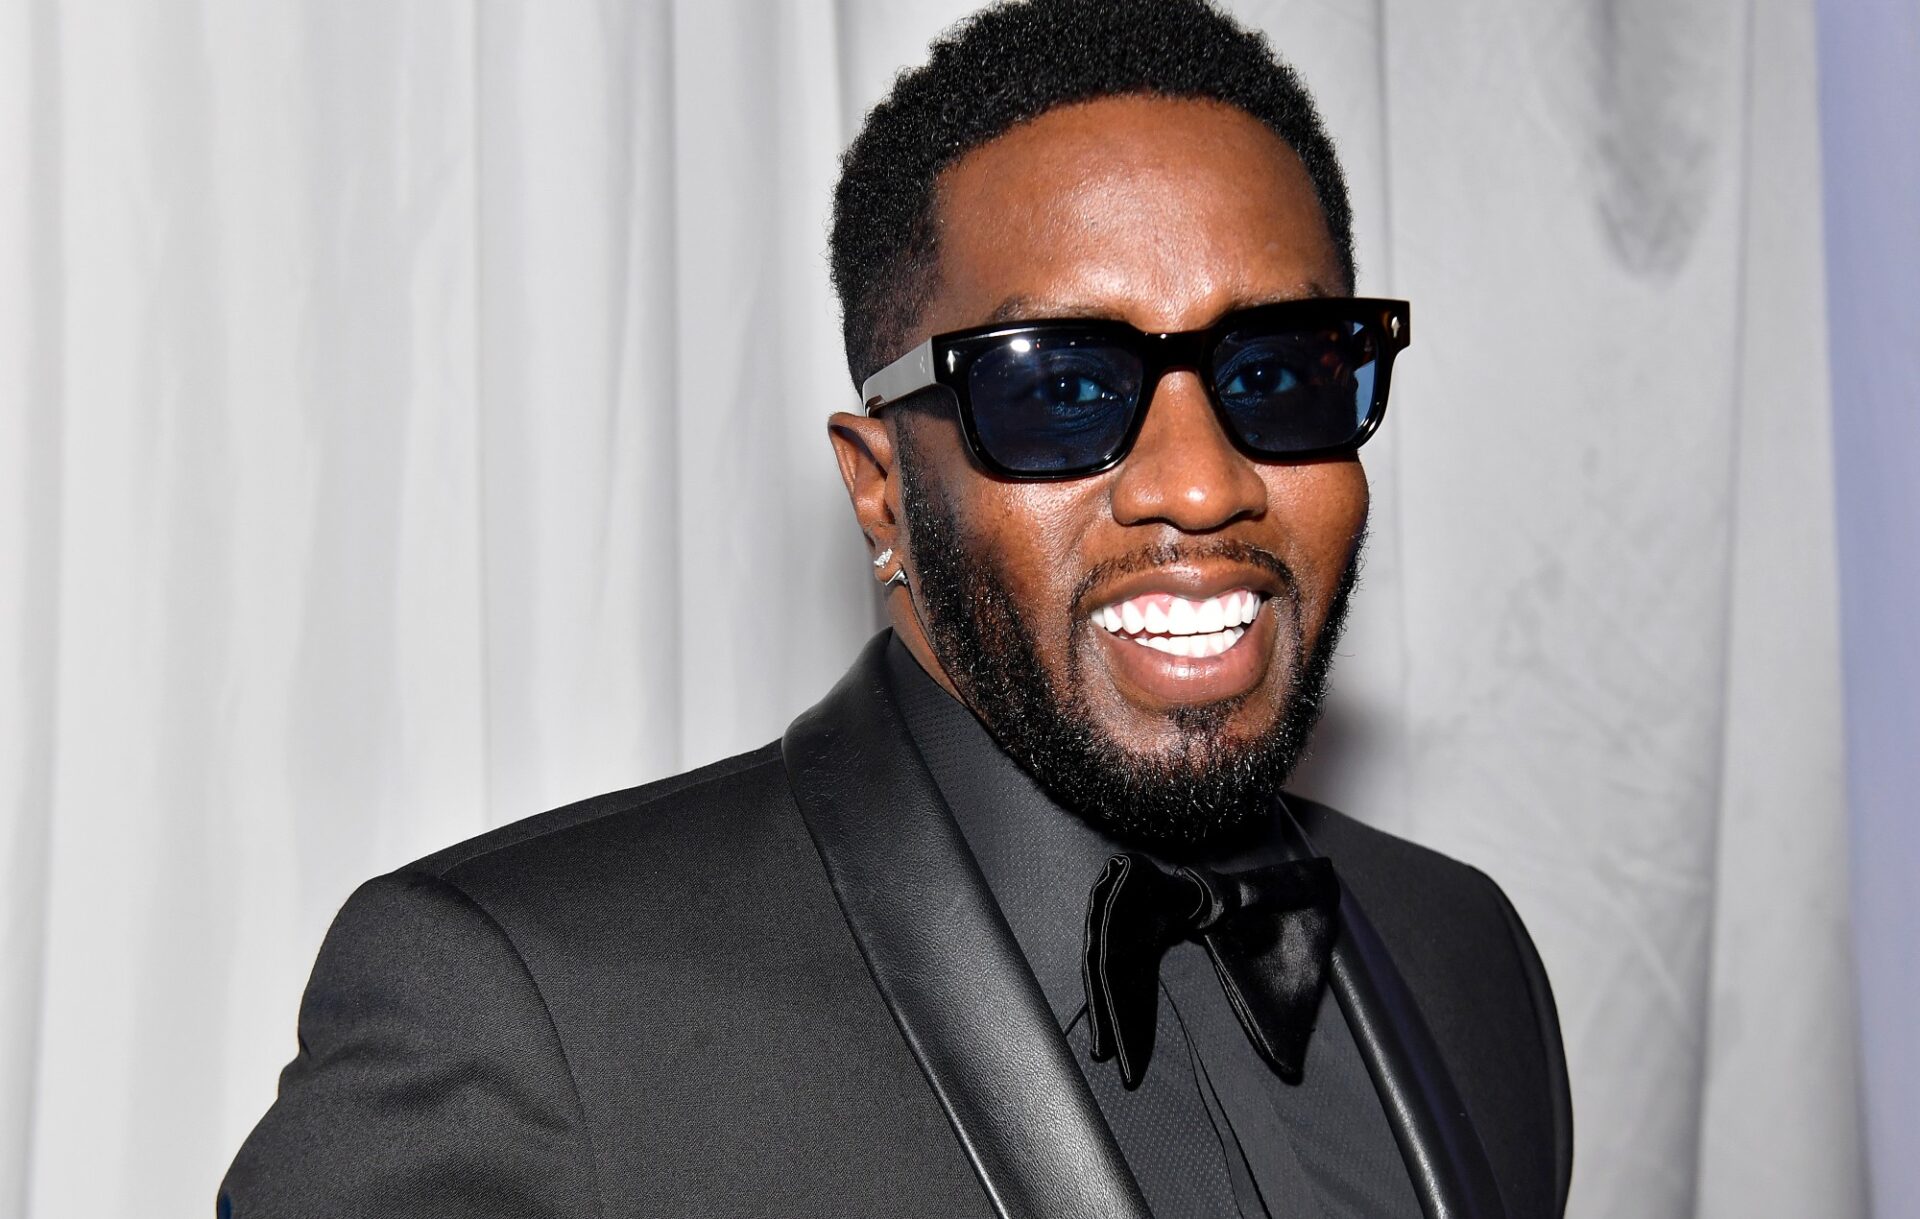 Diddy apologises for "inexcusable" 2016 video allegedly showing him attacking ex Cassie